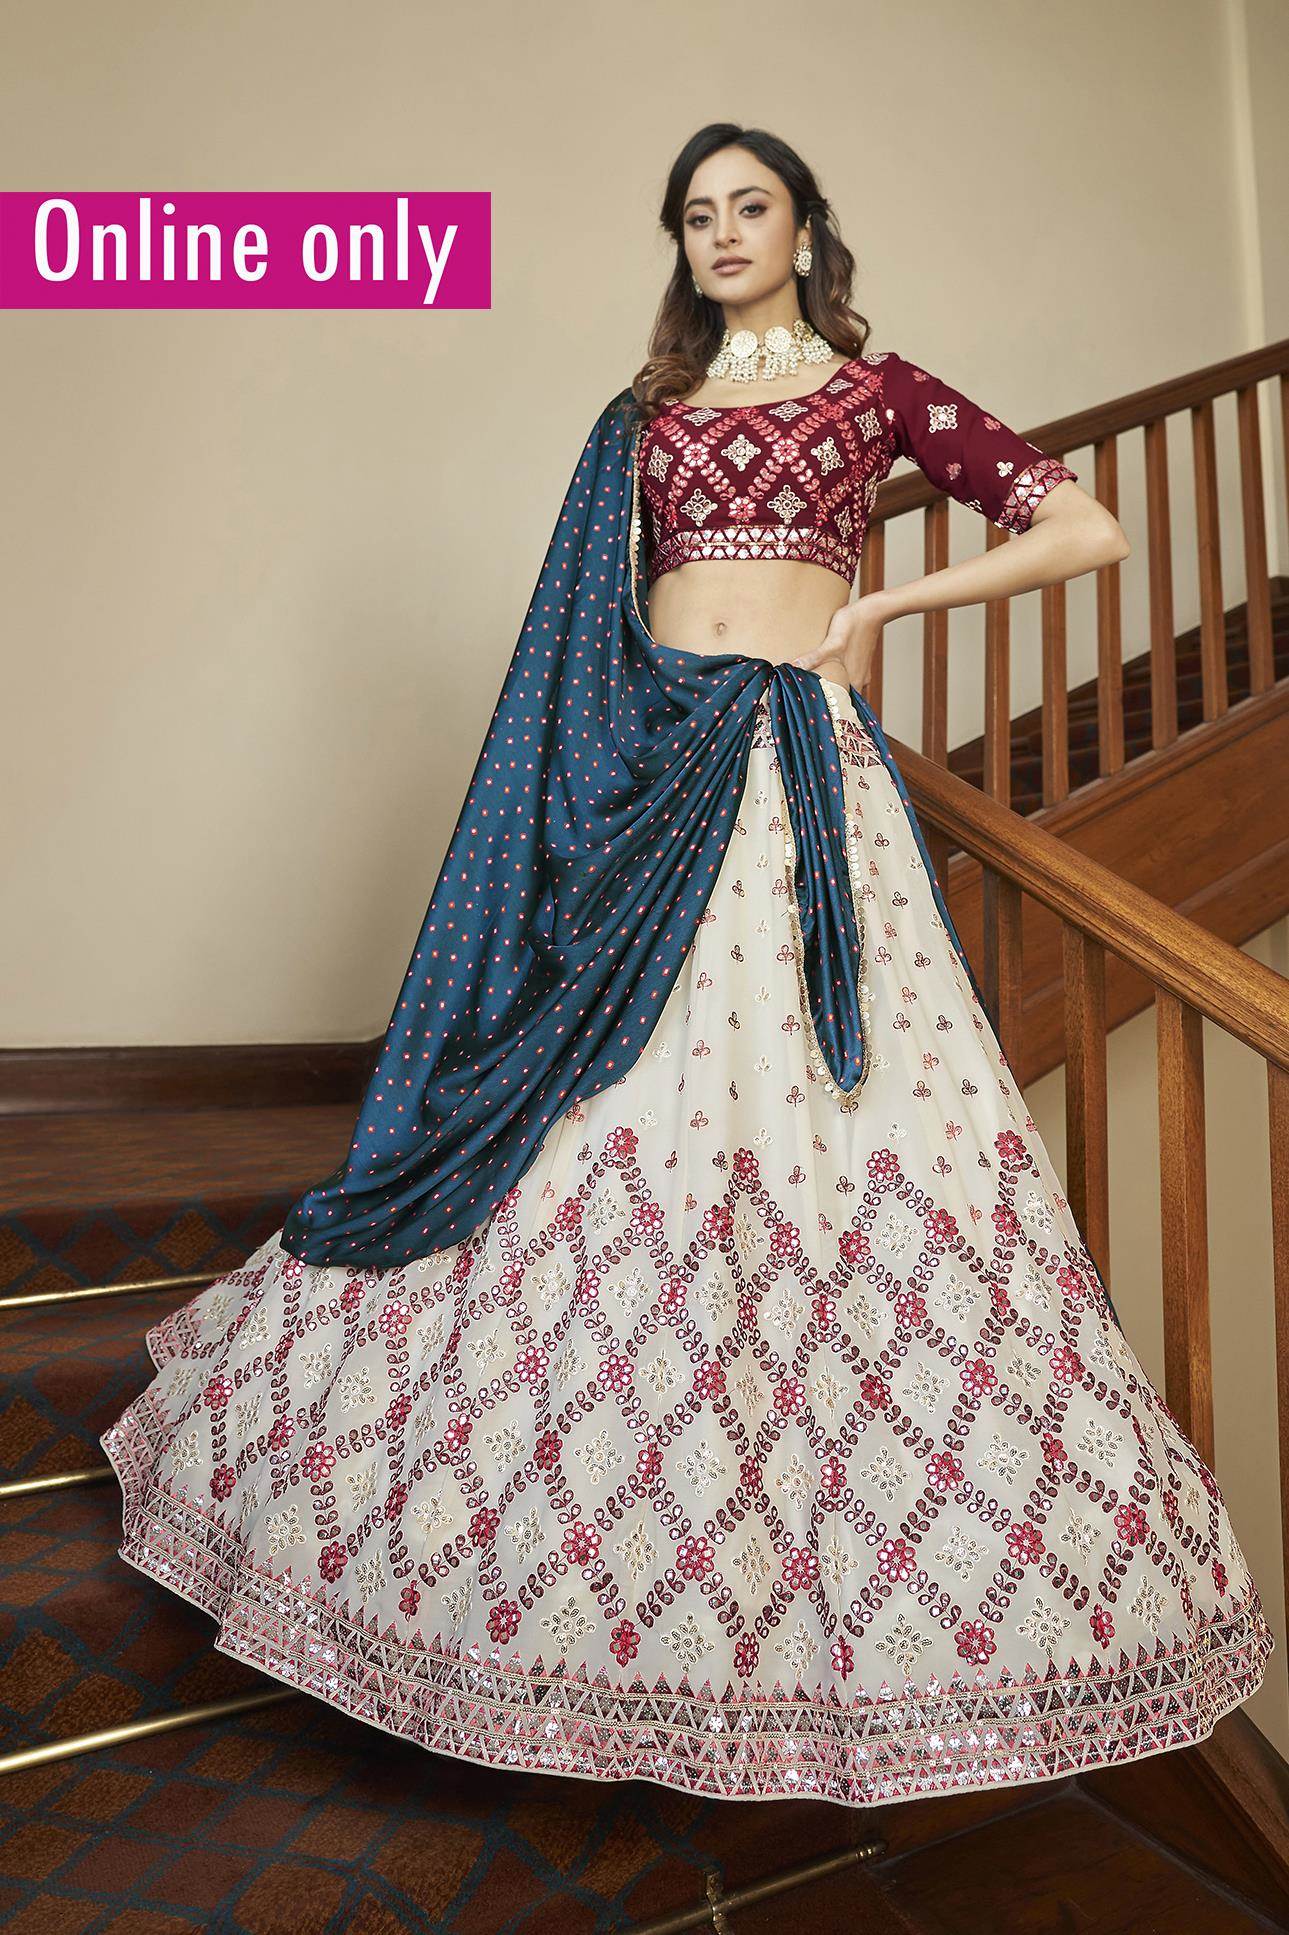 What color bridal lehenga pairs well with a navy blue tuxedo? - Quora